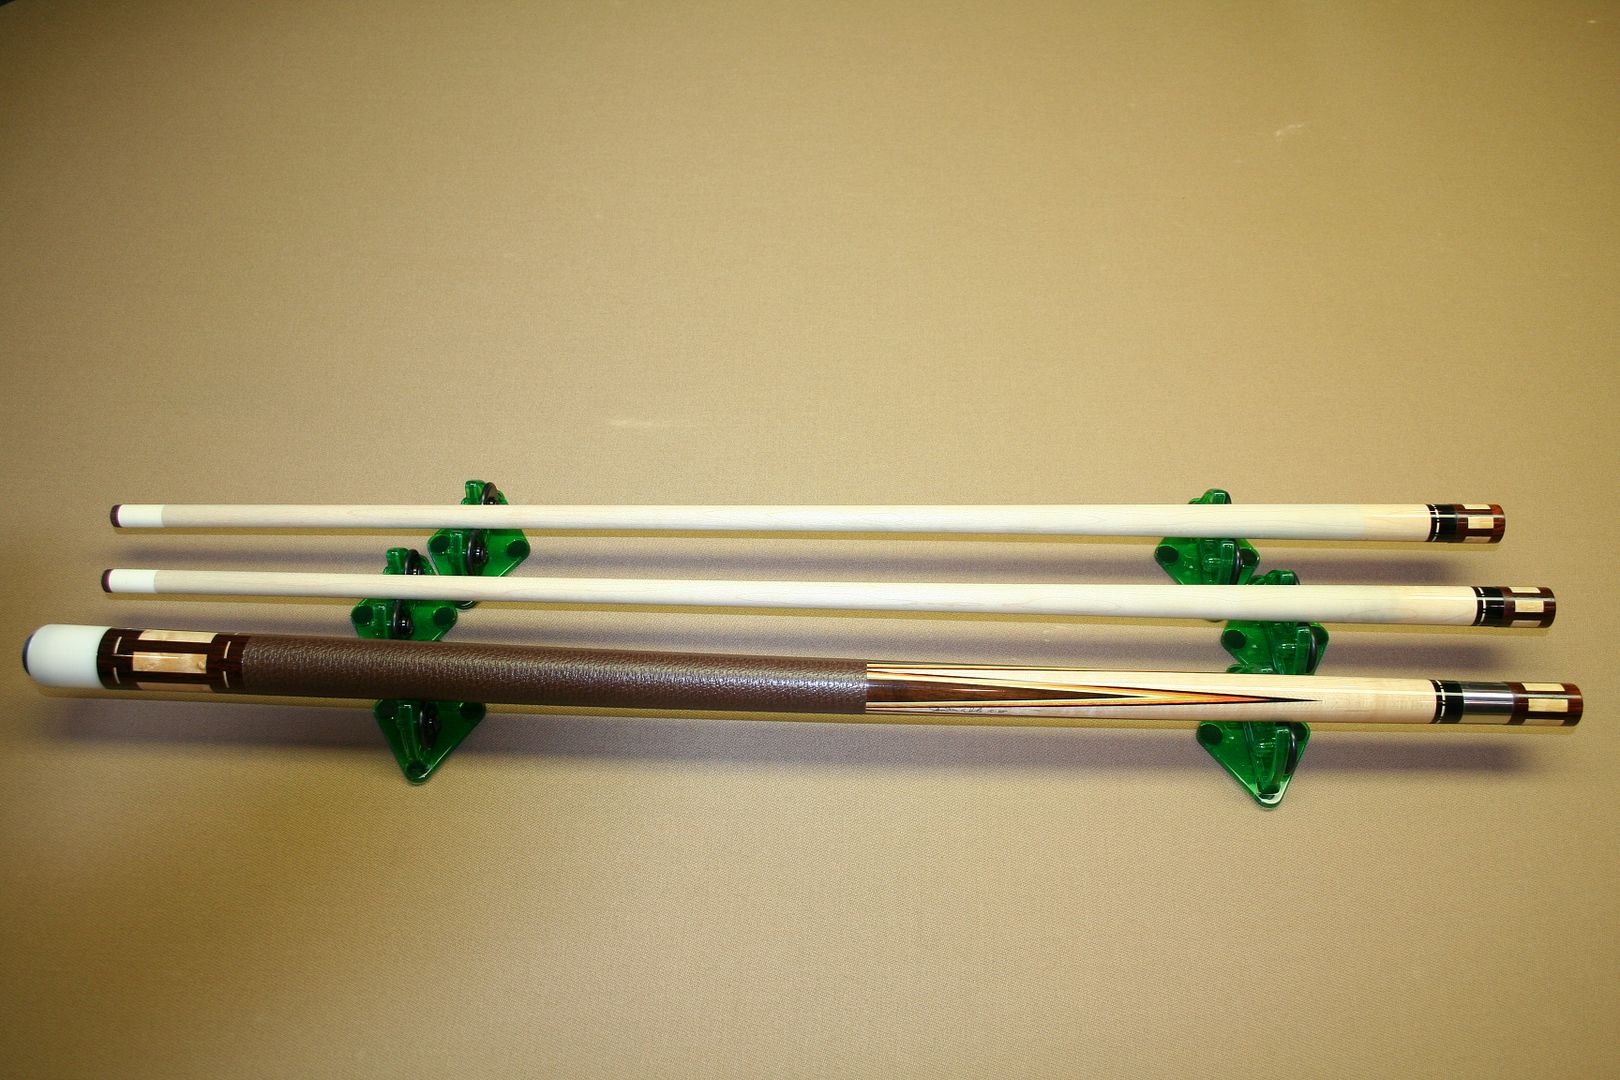 JMW%20cue%20and%20shafts.jpg